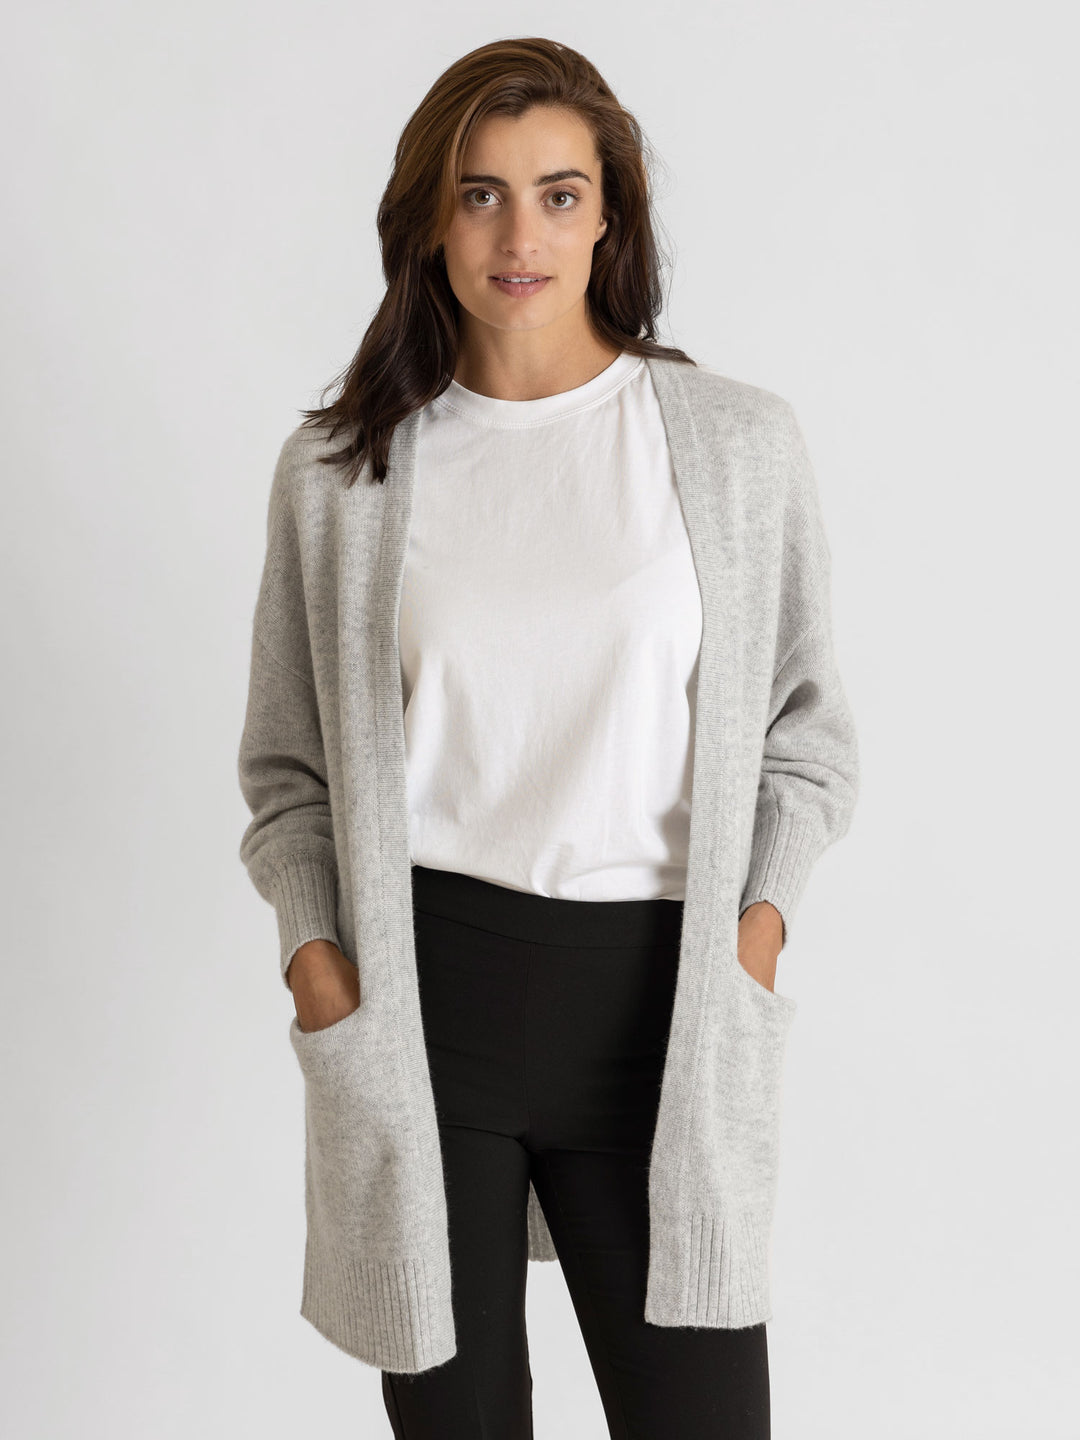 Cashmere cardigan in 100% cashmere by Kashmina, long cardigan, light grey, with pockets